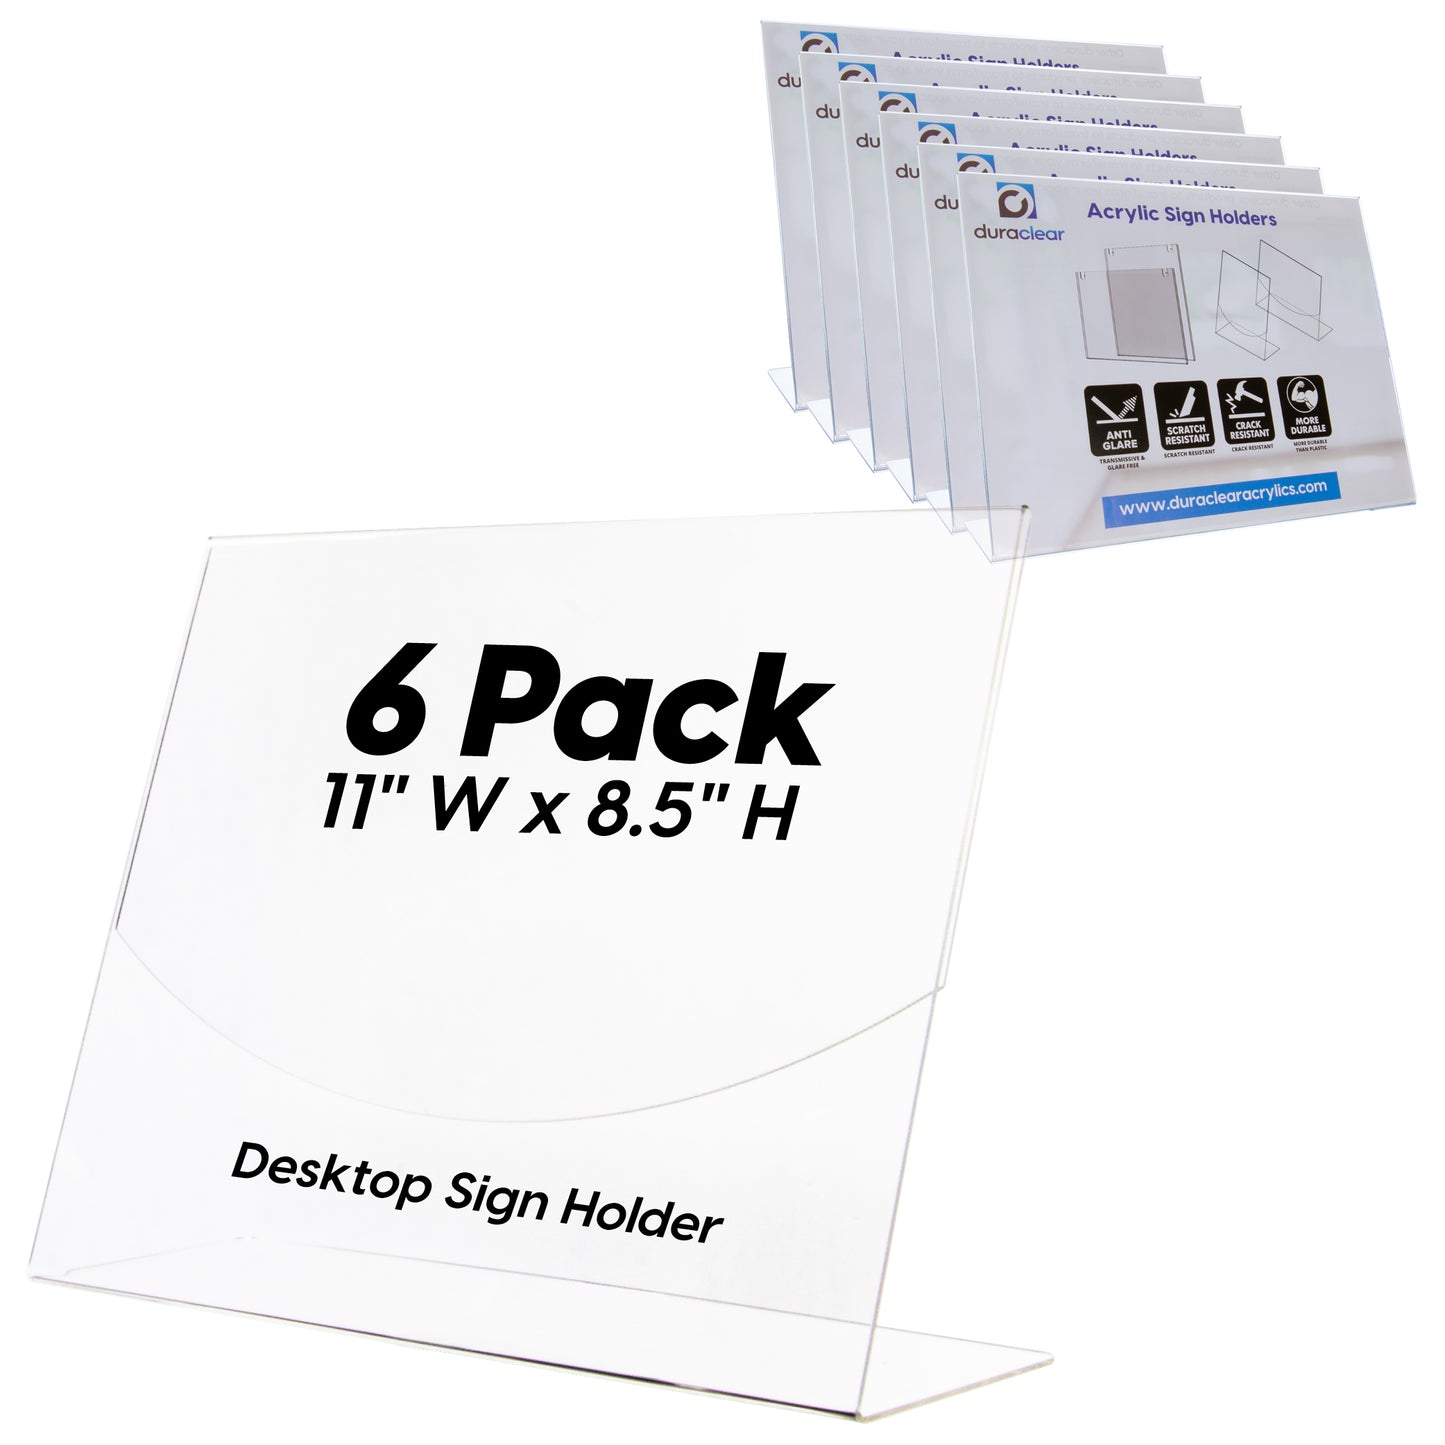 8.5"x11" Desktop Paper Sign Holder - Extra Thick and Durable Display Sign Holders - 6 Pack, Landscape